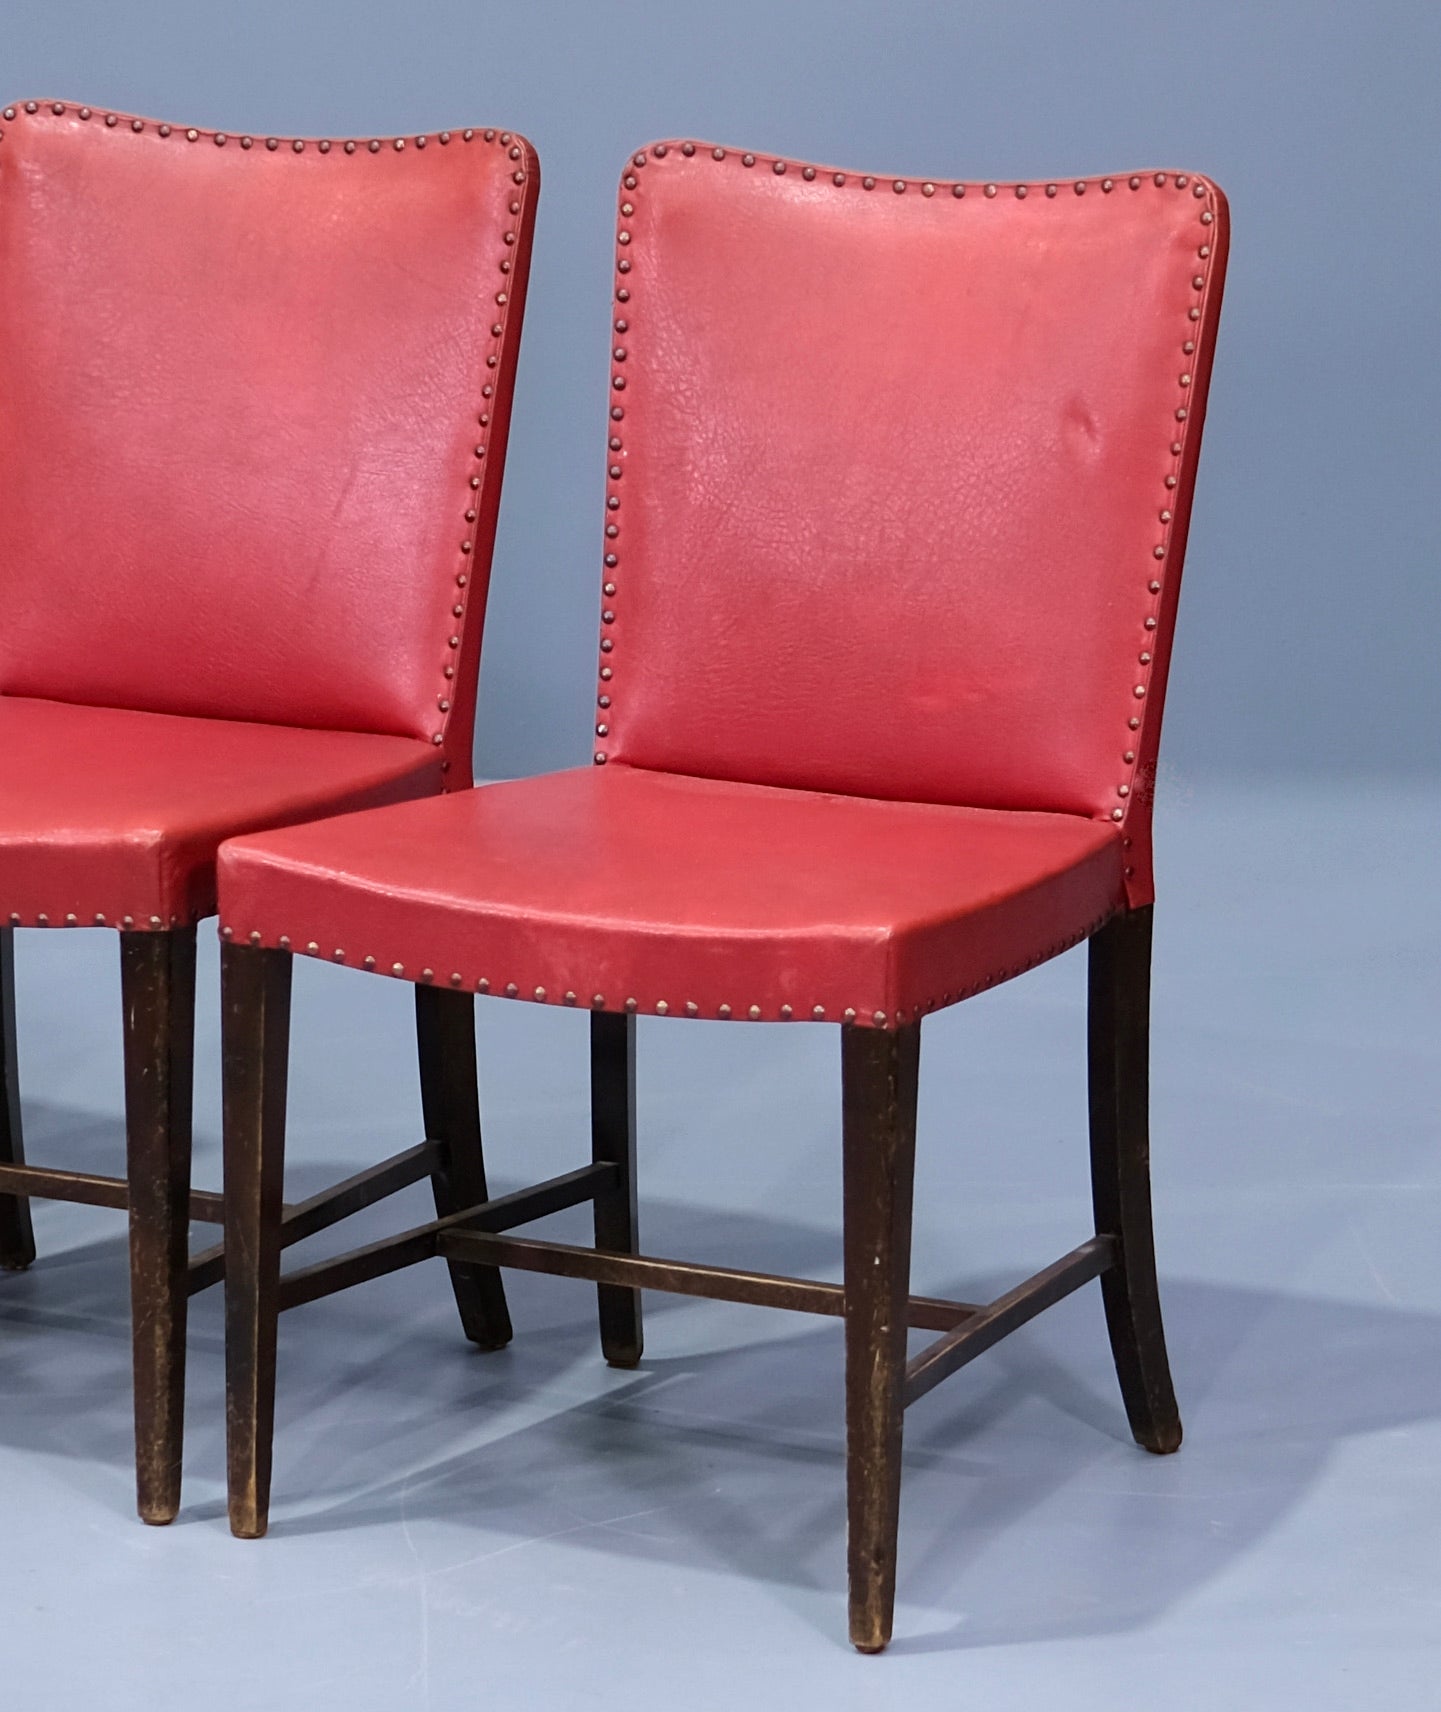 Four Early Danish Dining Chairs